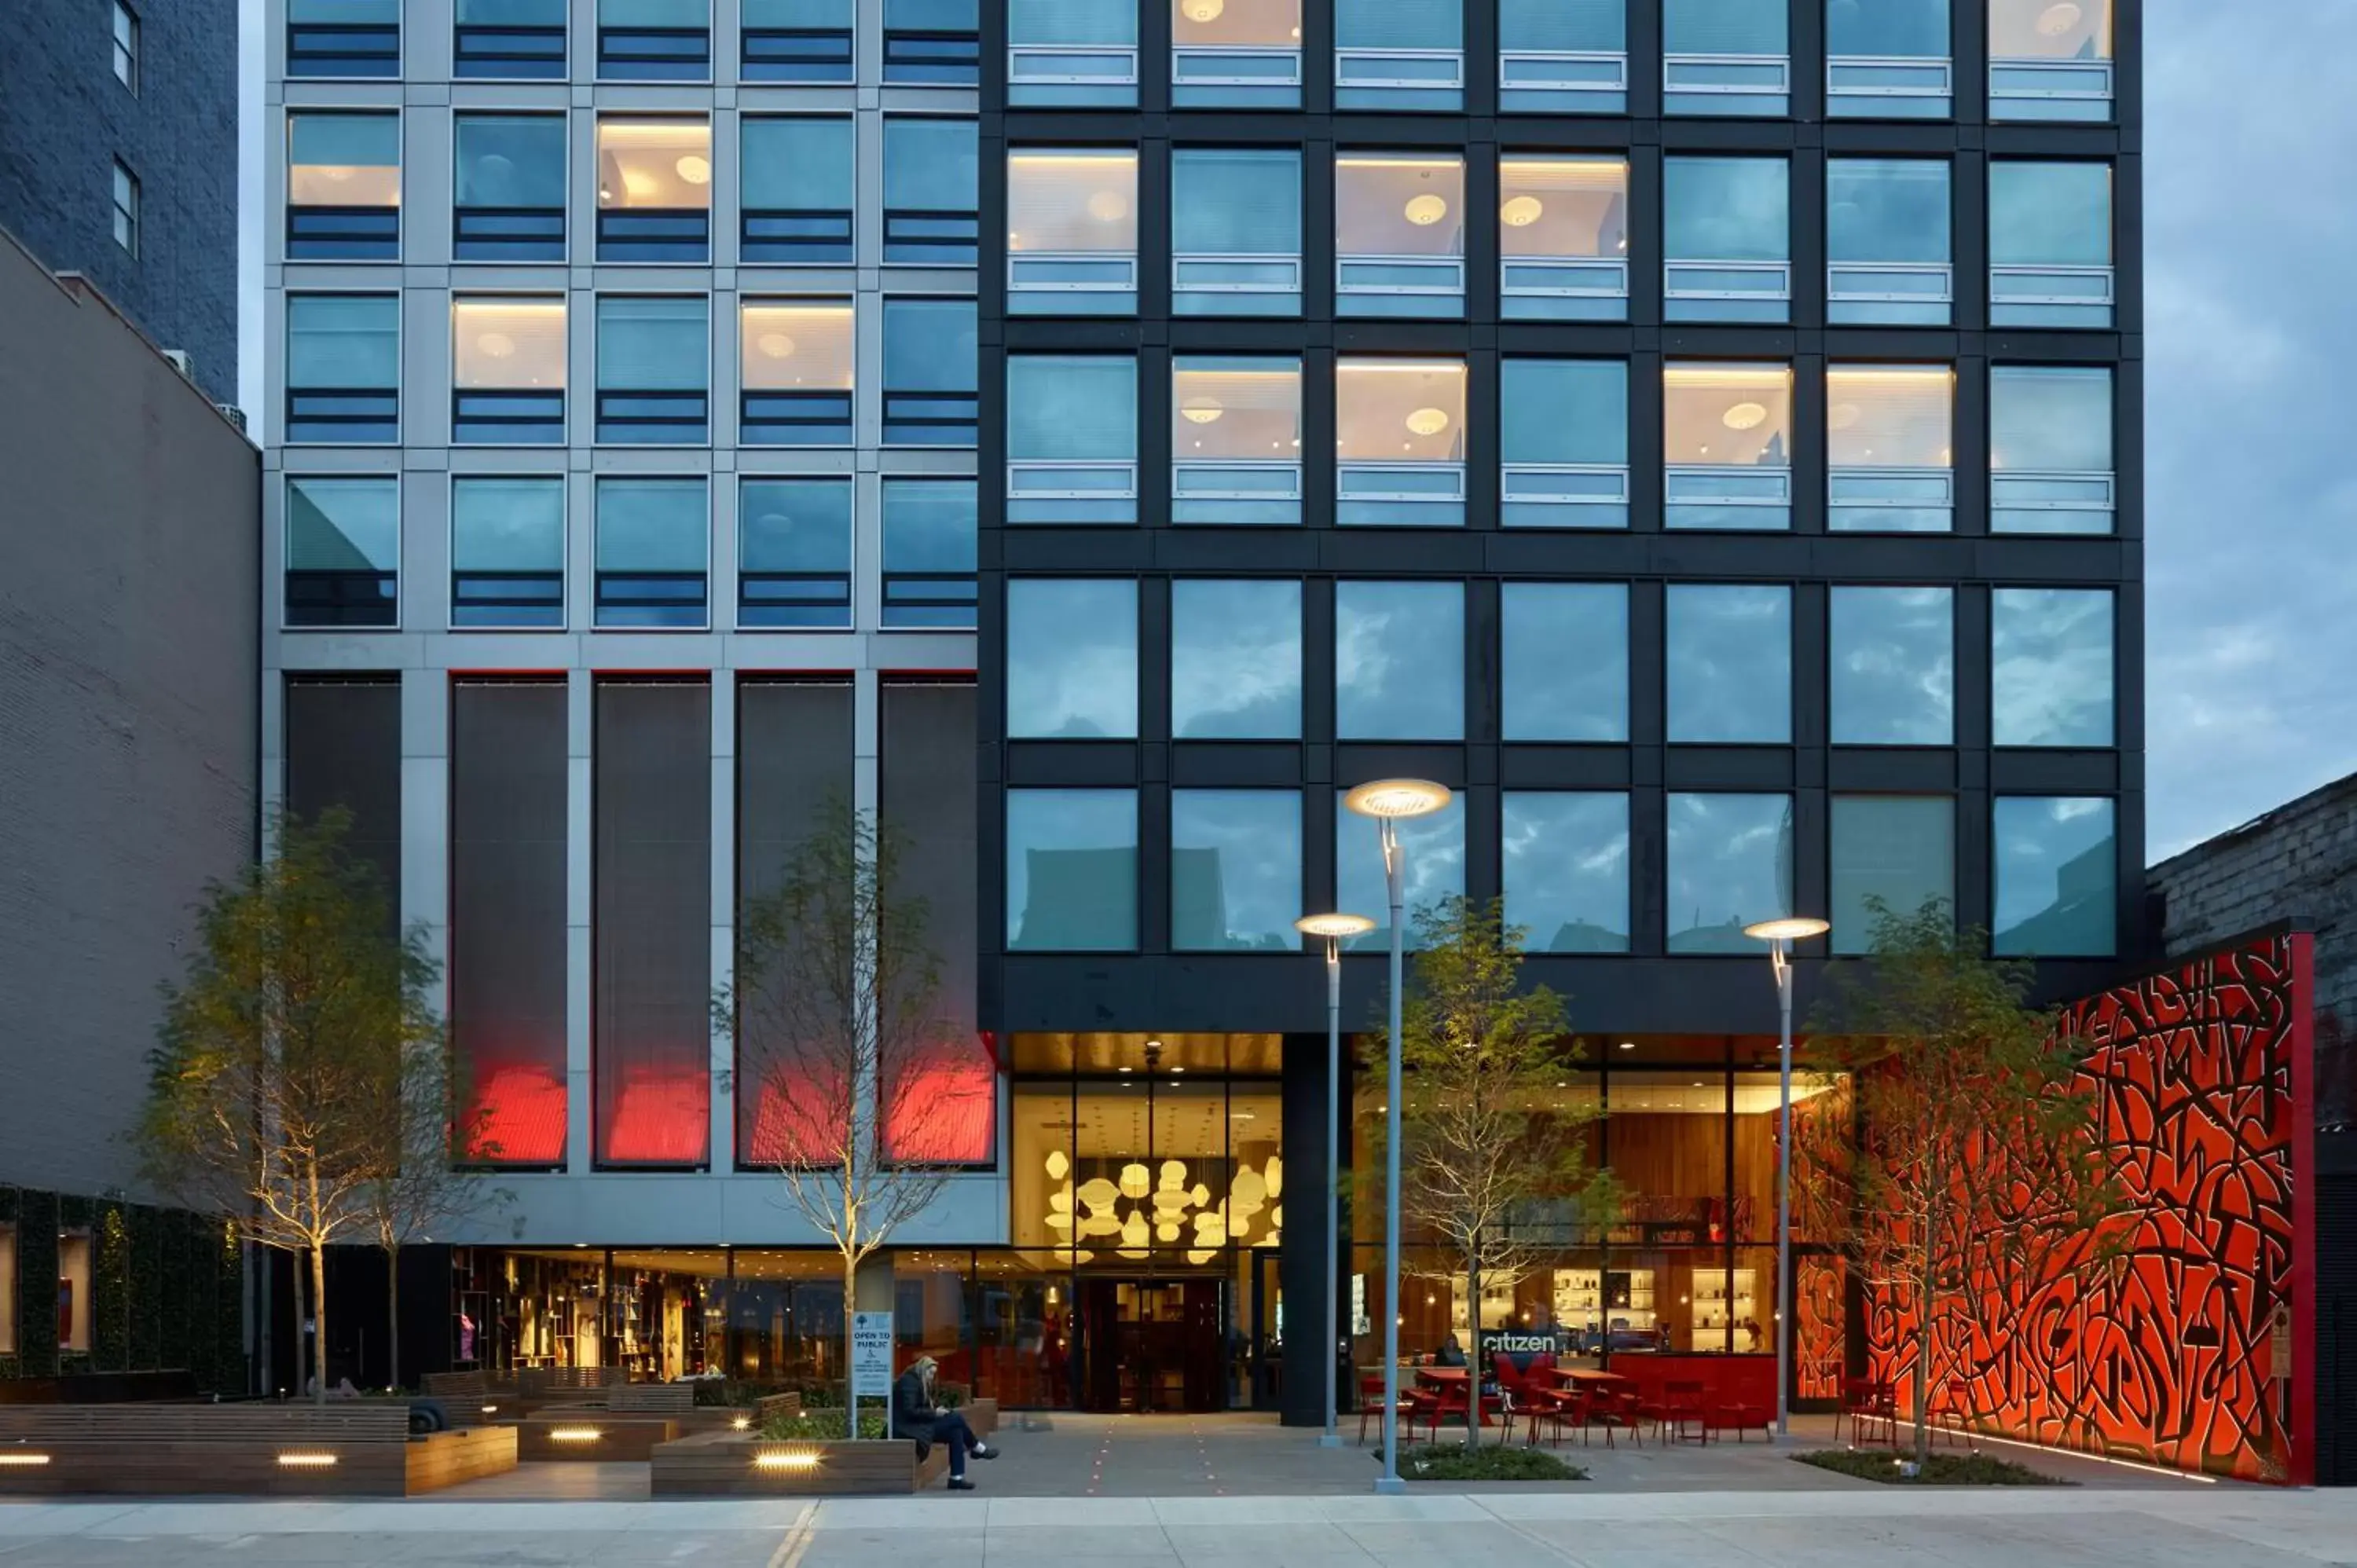 Property Building in citizenM New York Bowery